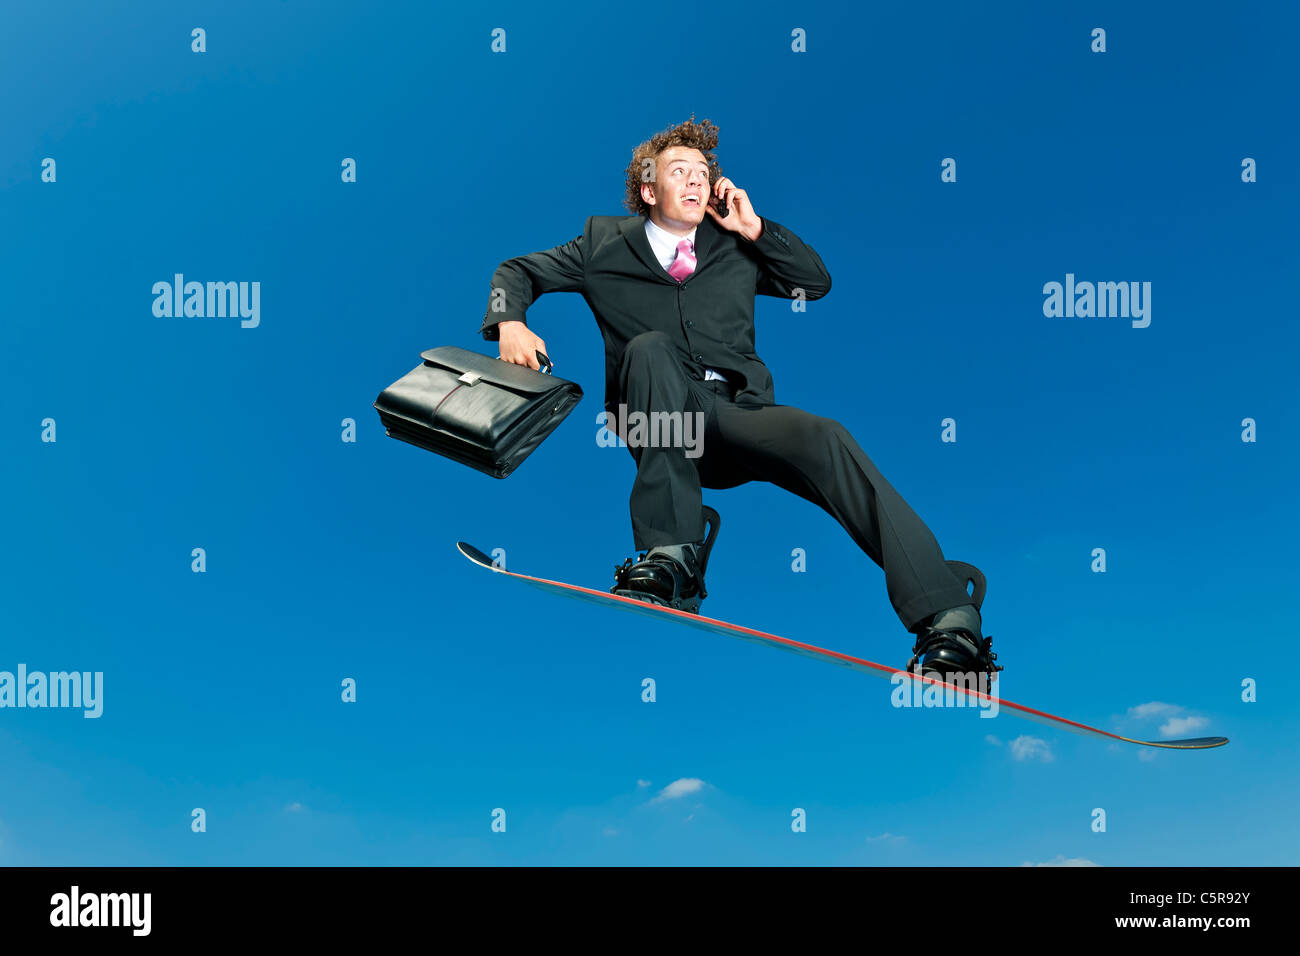 A businessman snowboarder on cell phone. Stock Photo